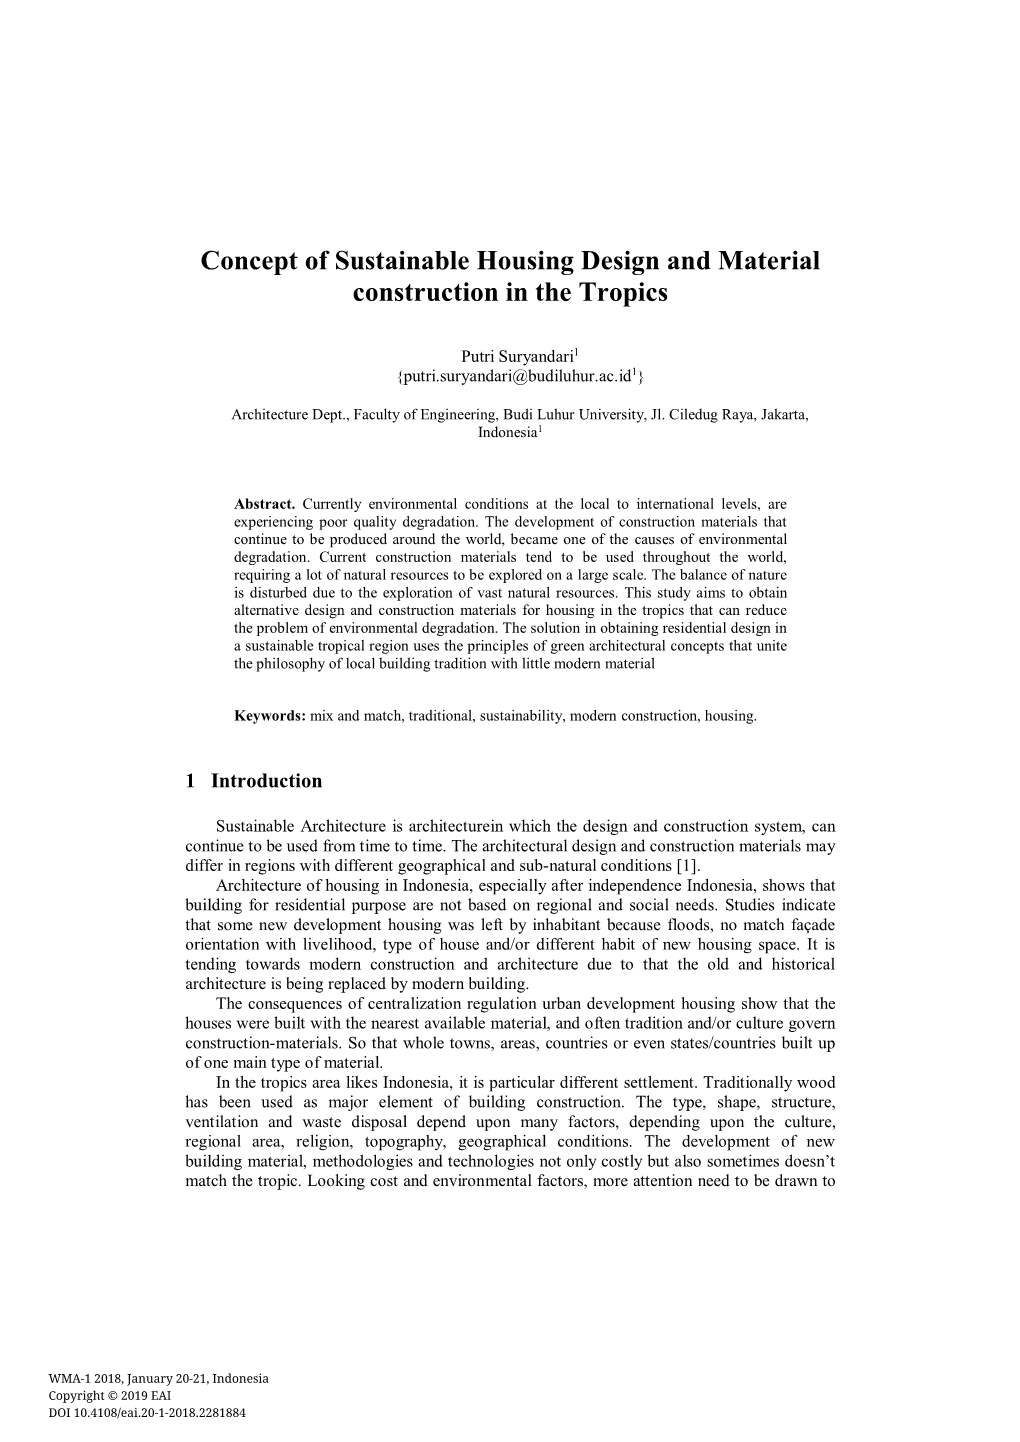 Concept of Sustainable Housing Design and Material Construction in the Tropics